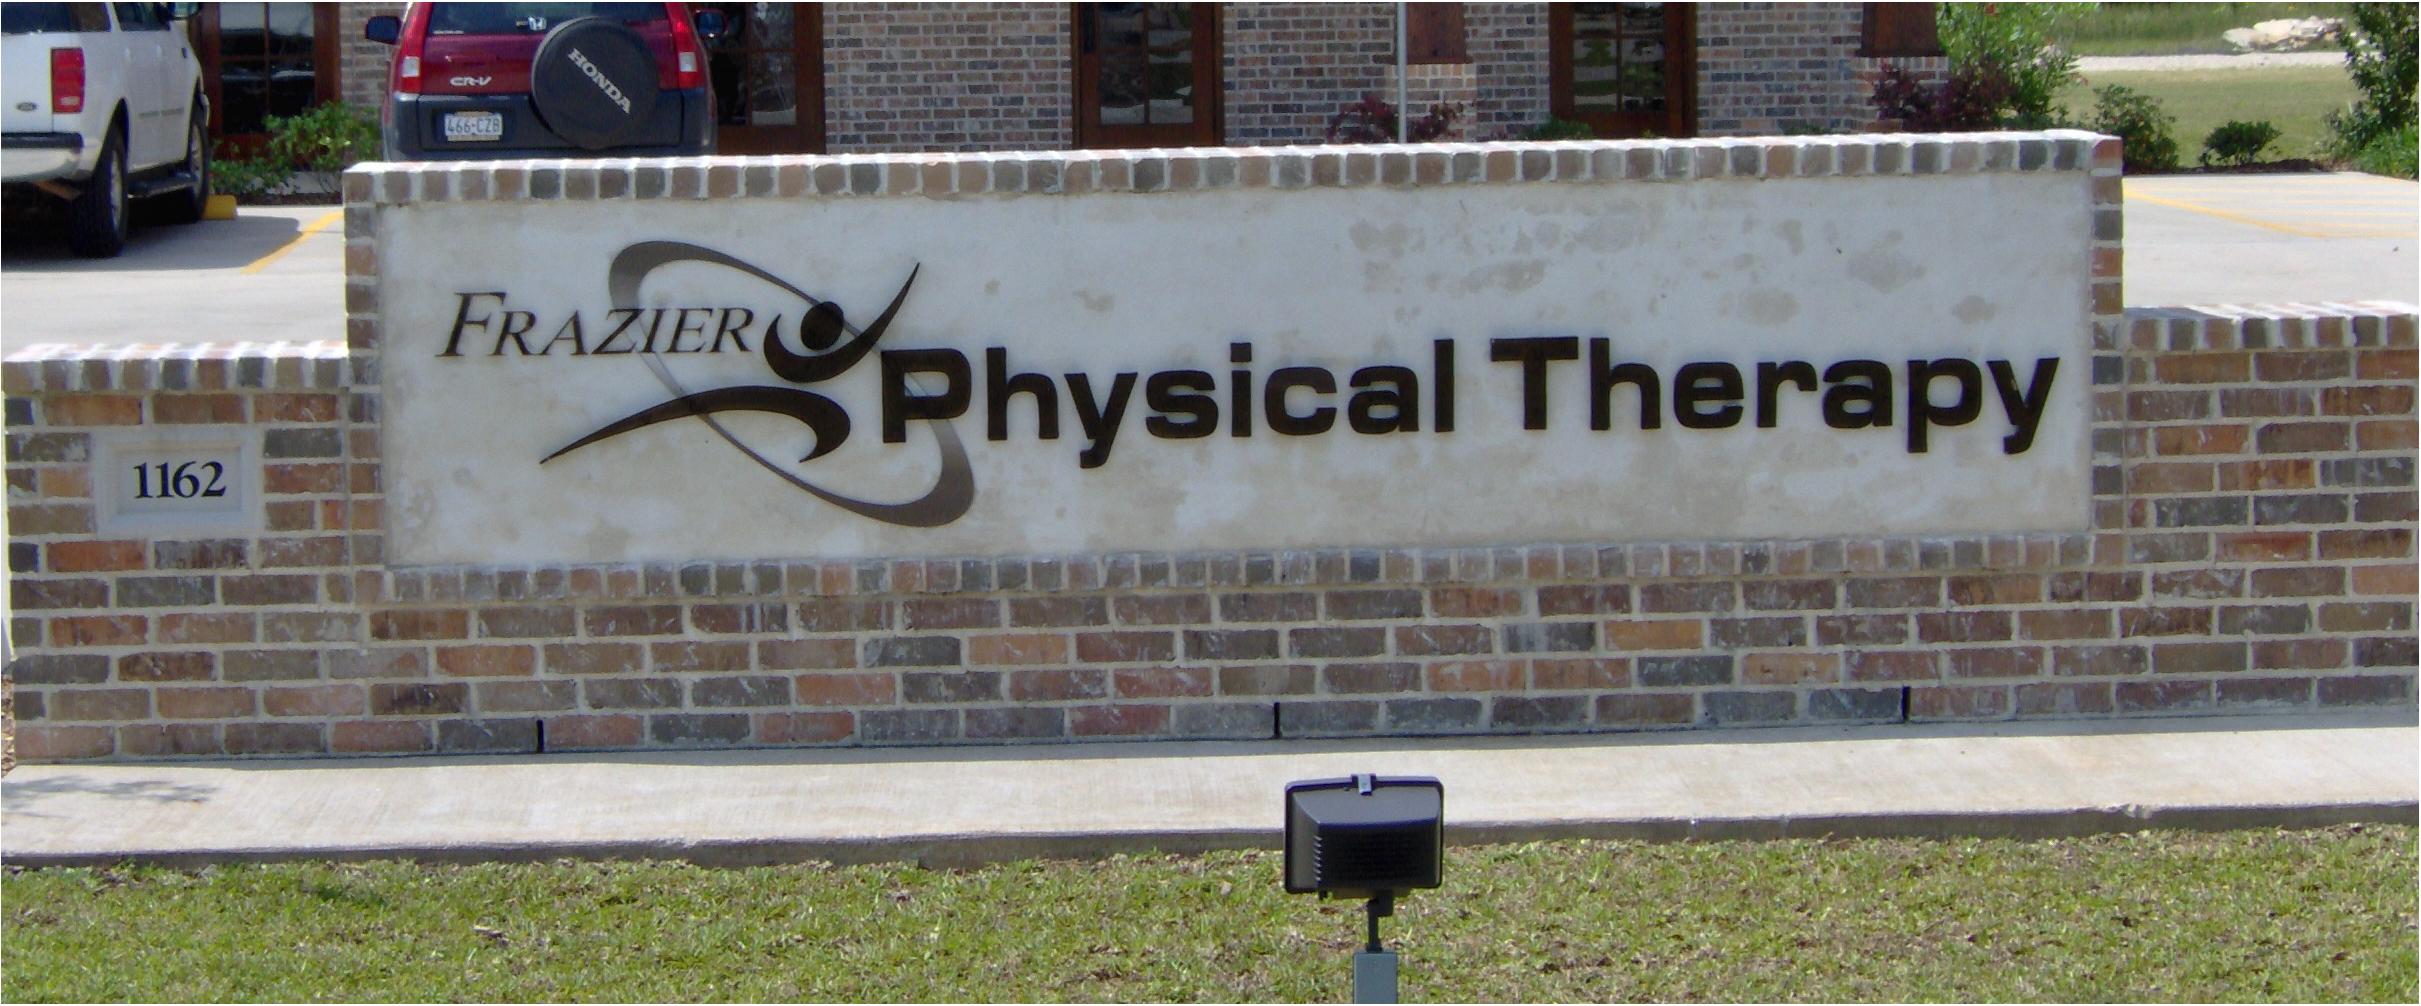 Frazier Physical Therapy - Monument Sign